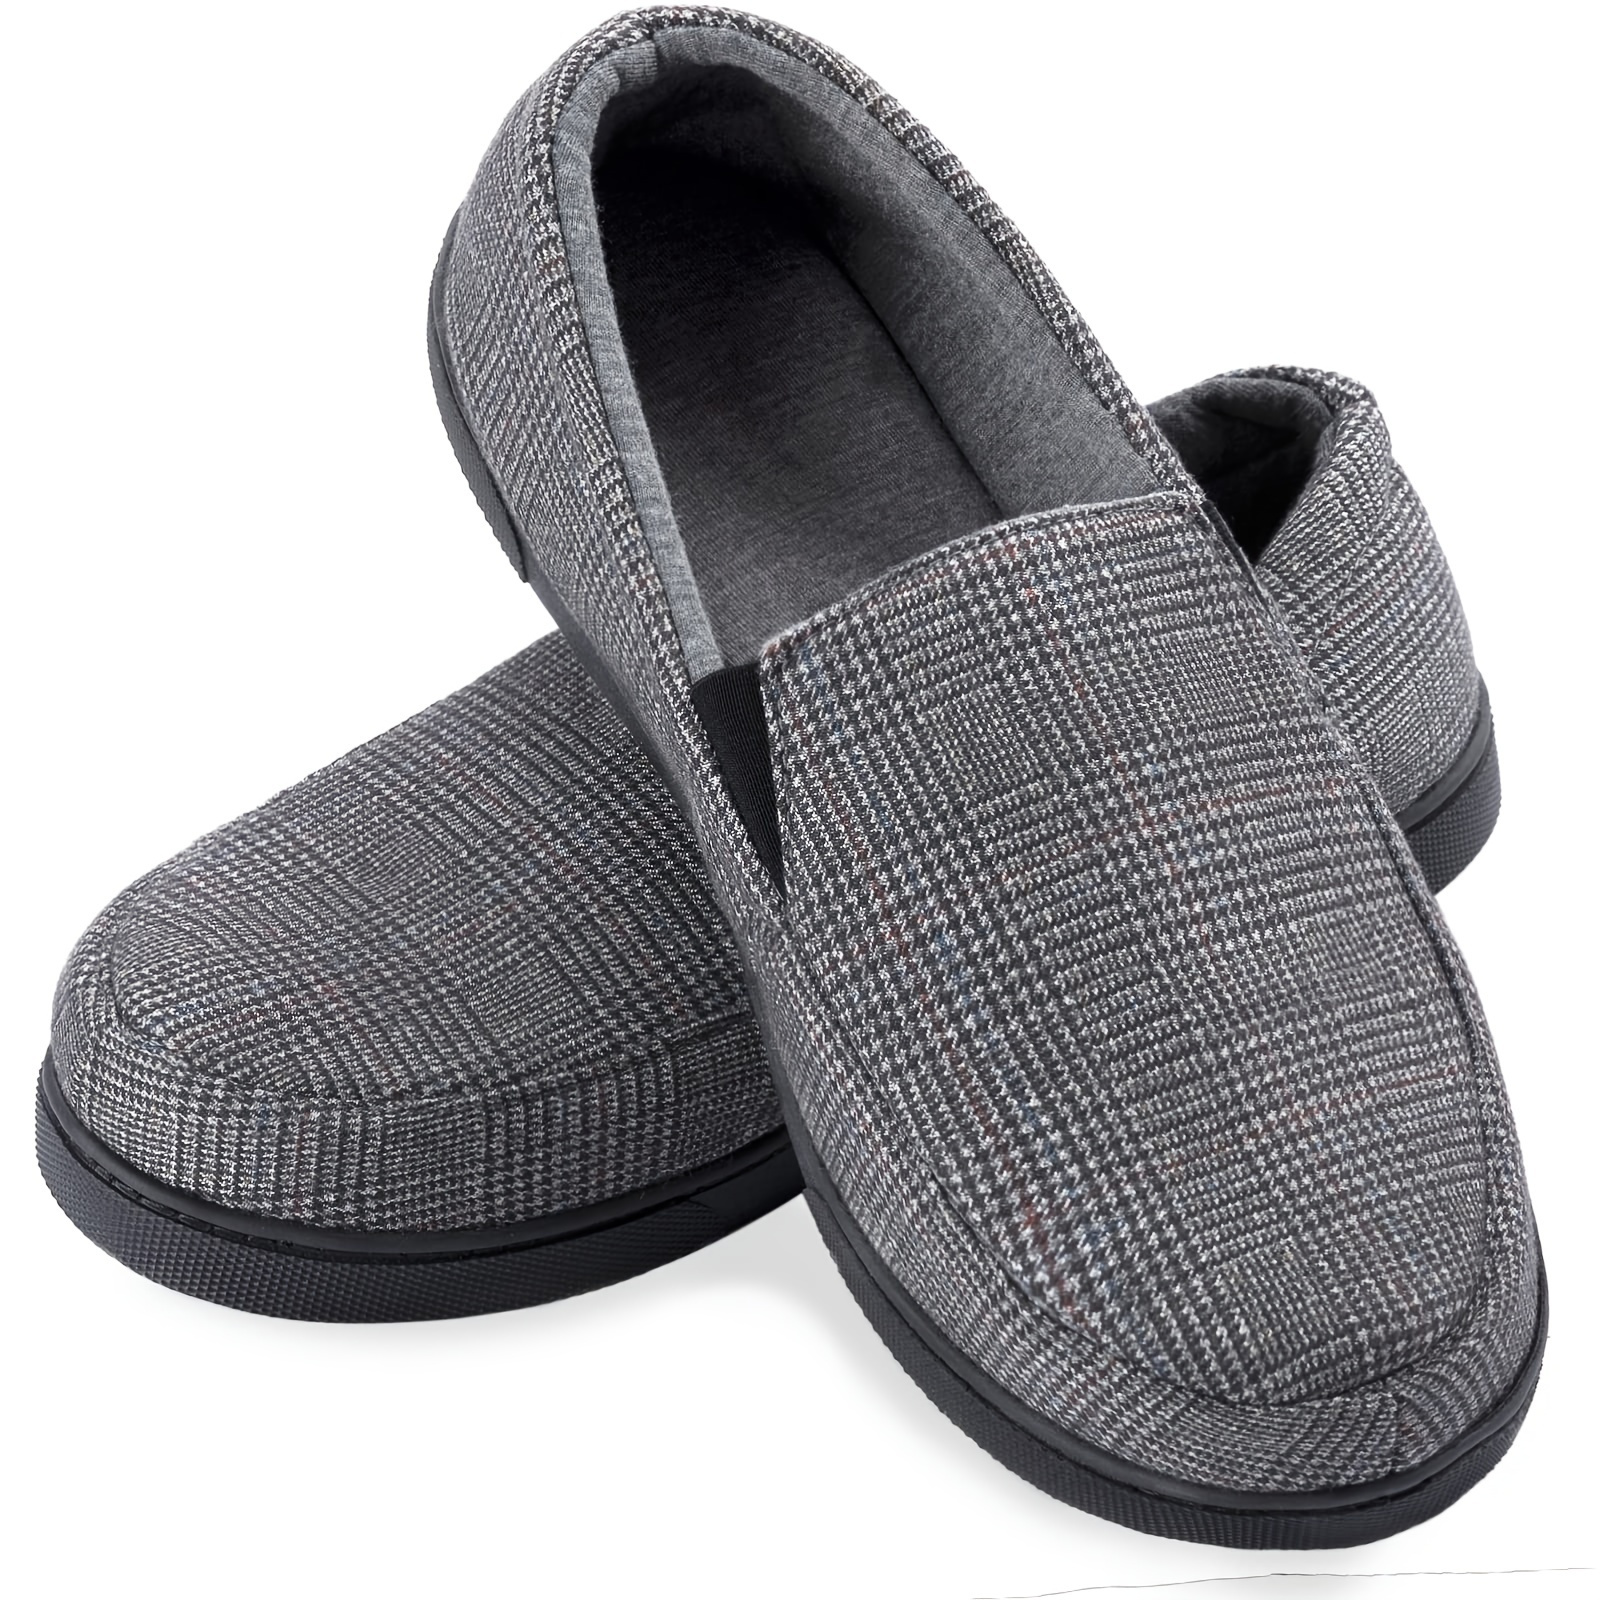 

Men's Lightweight House Slipper With Memory Foam, Cozy Closed Back Bedroom Slipper For Indoor Outdoor, Gift For Father/dad